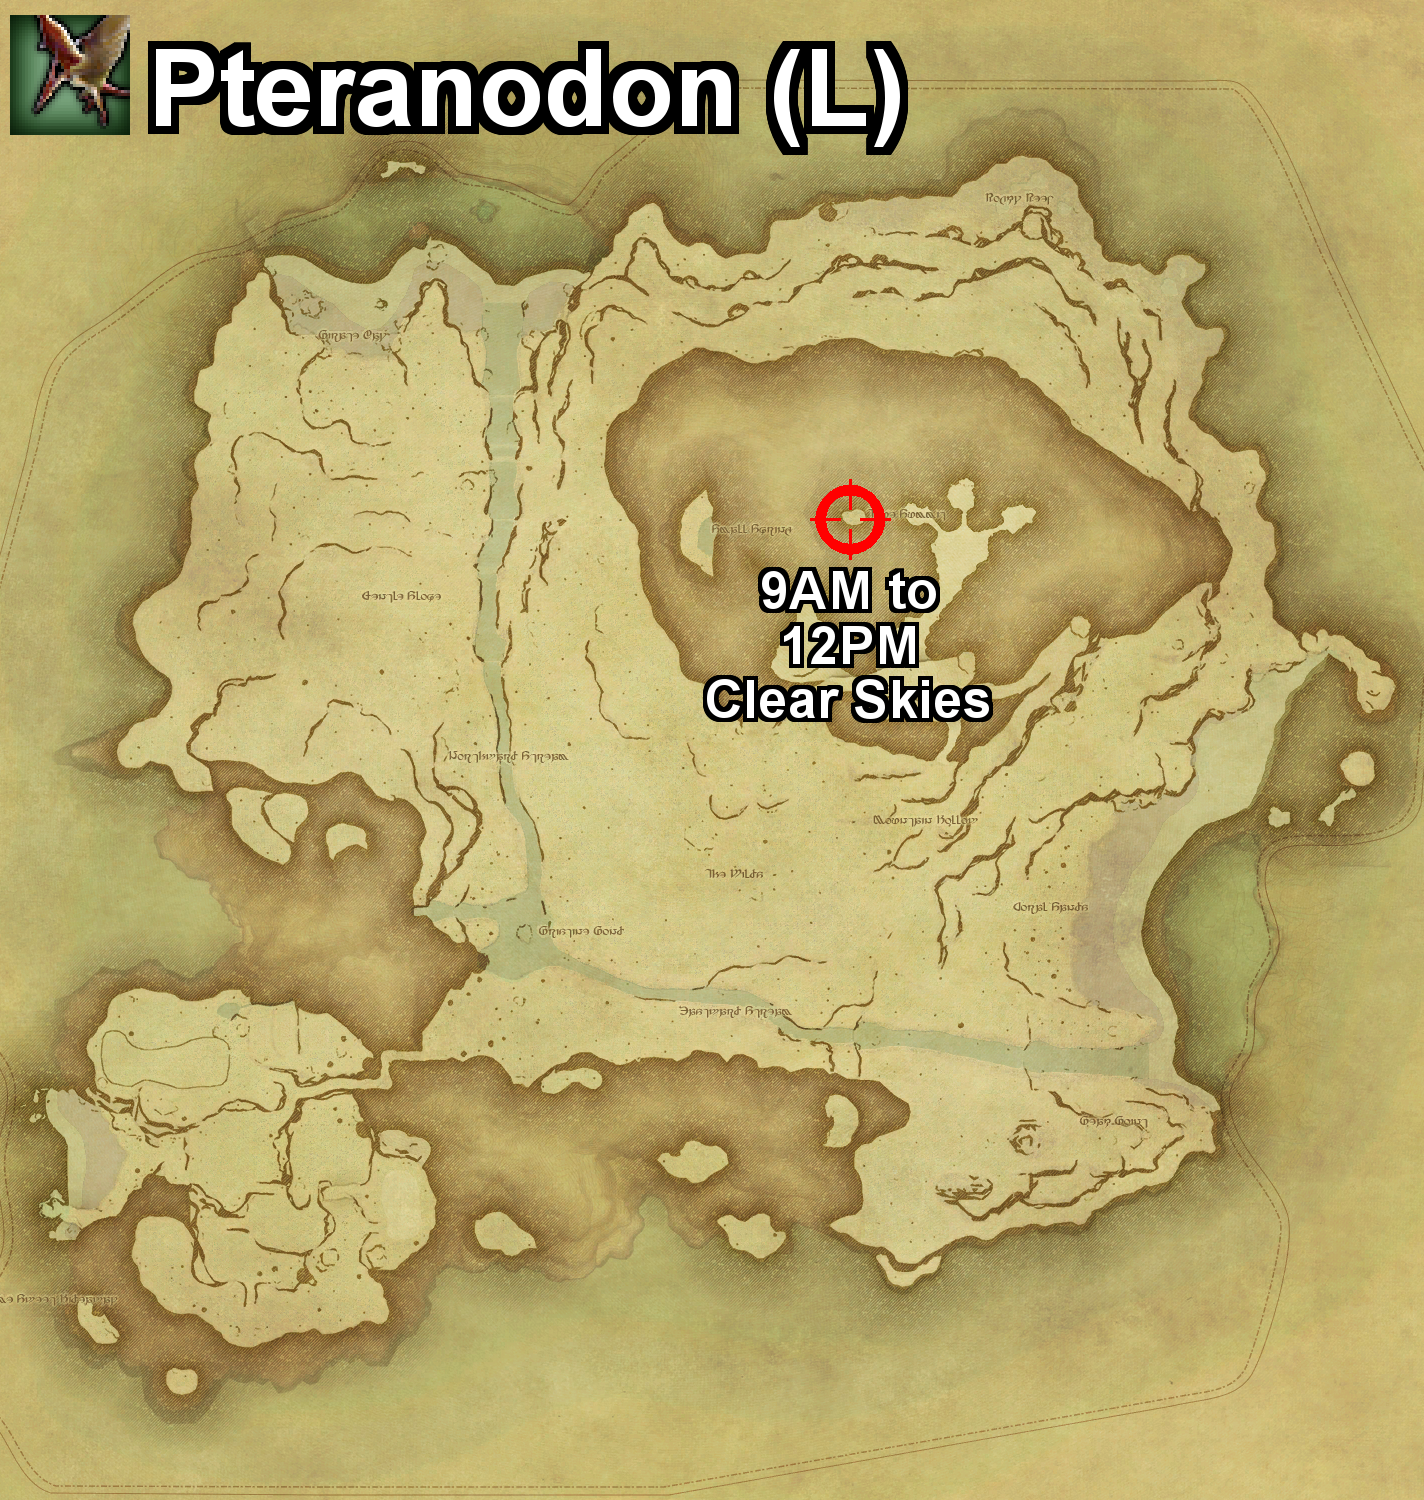 The location where the Pteranodon can be found, and the required conditions, on Island Sanctuary in Final Fantasy XIV.